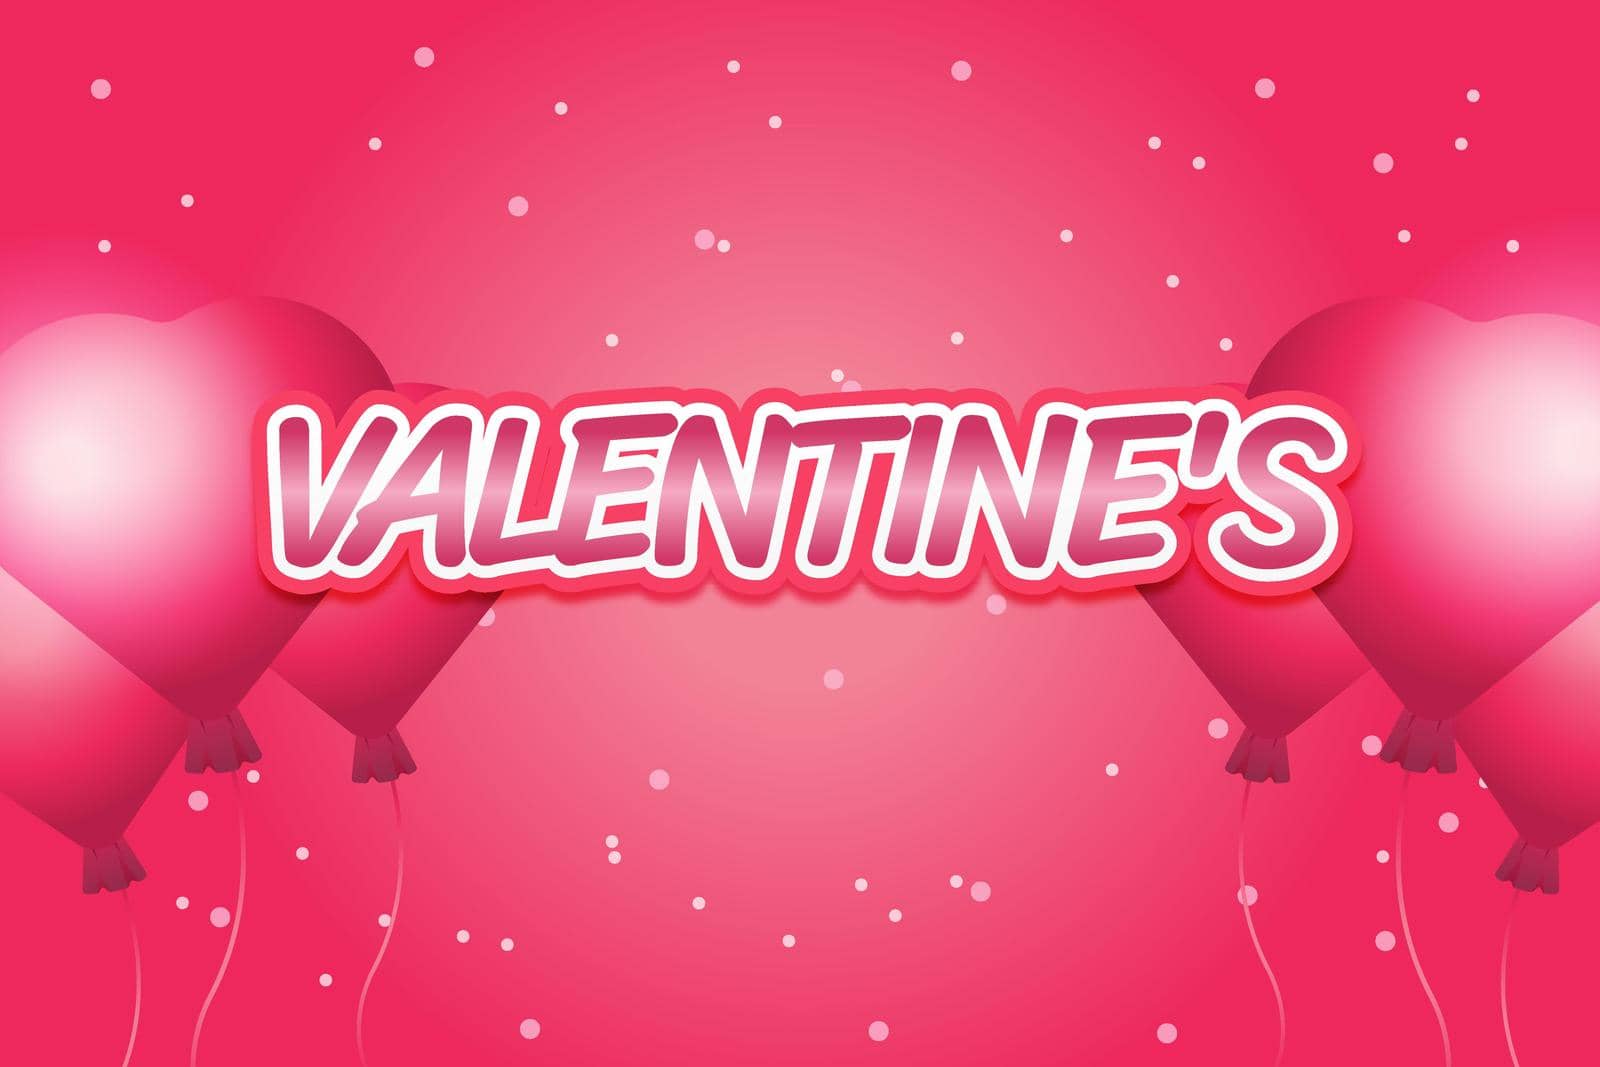 Editable valentines text effect , words and font can be changed